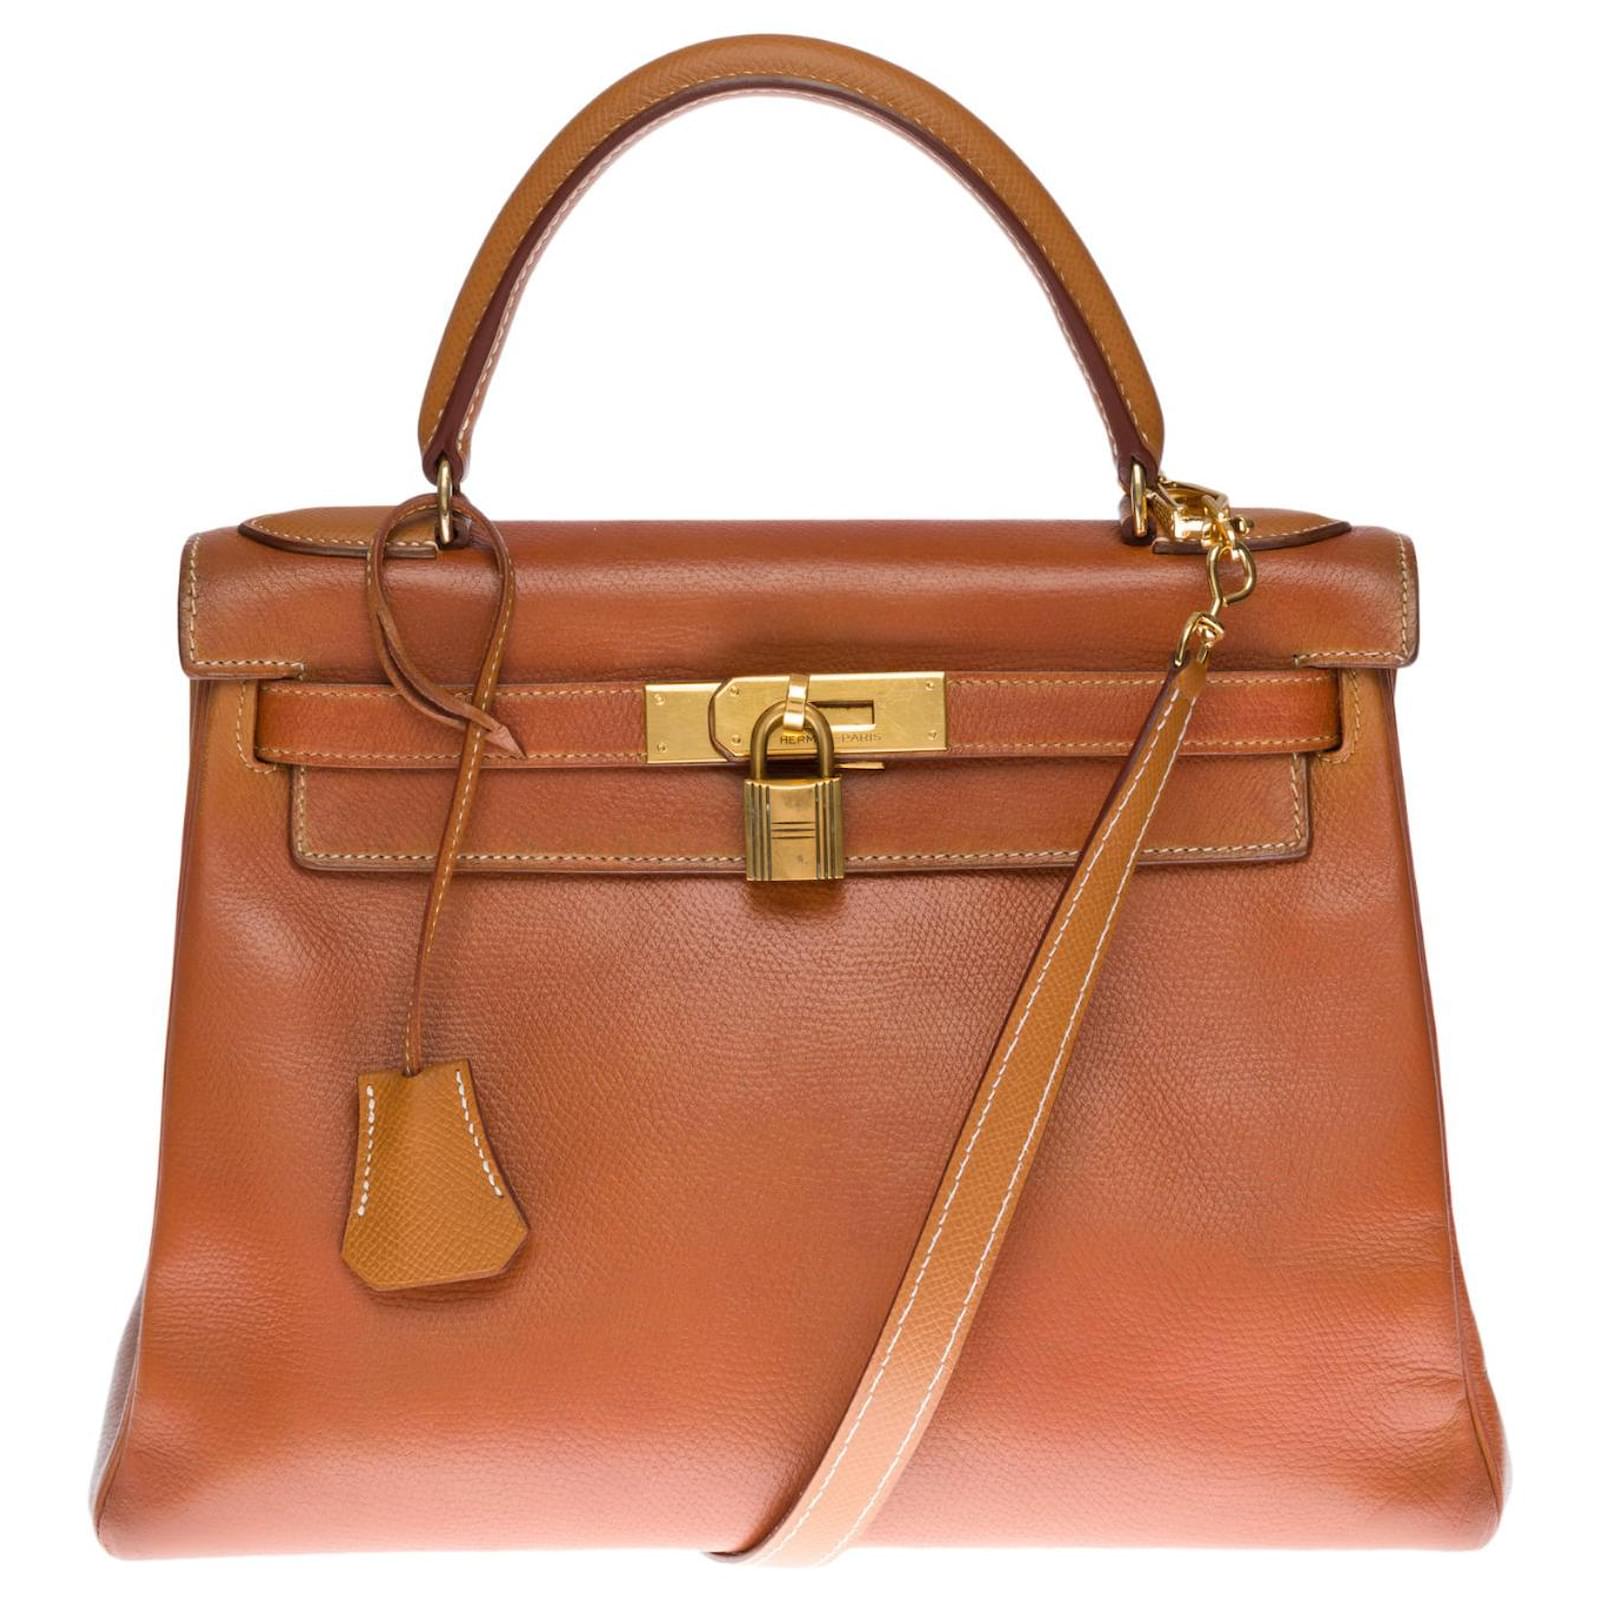 Hermes Kelly 32 cm Handbag in Brown Courchevel Leather